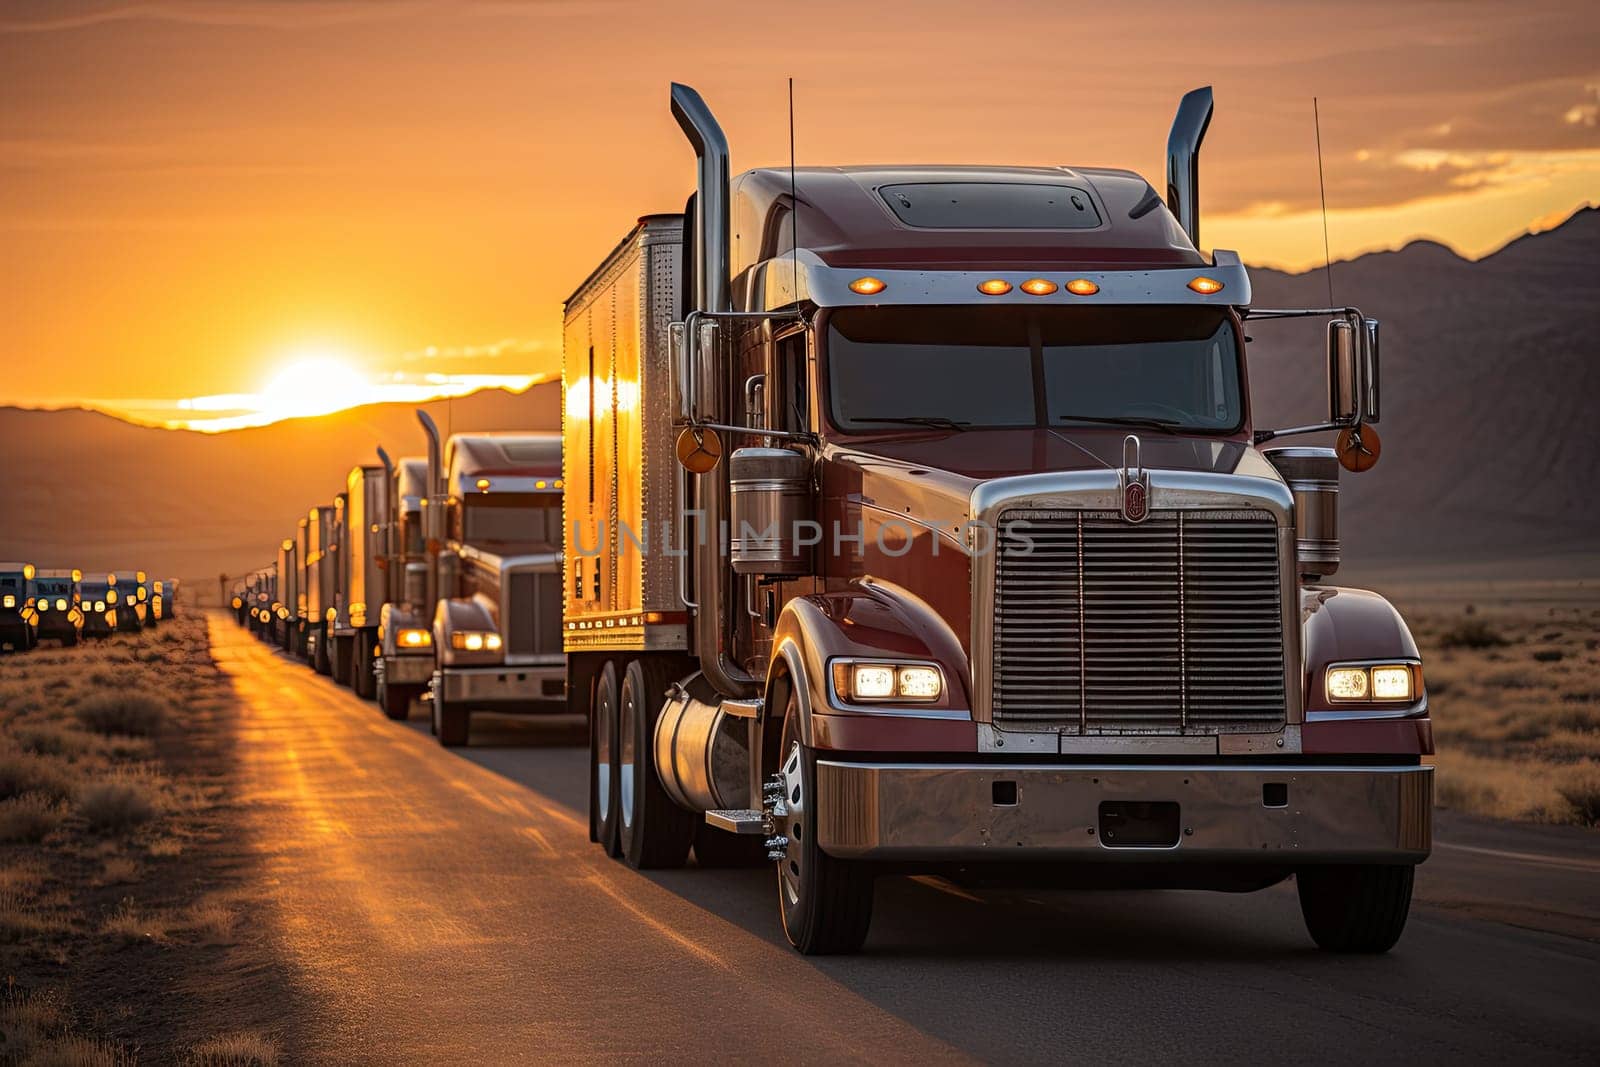 A semi truck driving down a road at sunset by golibtolibov